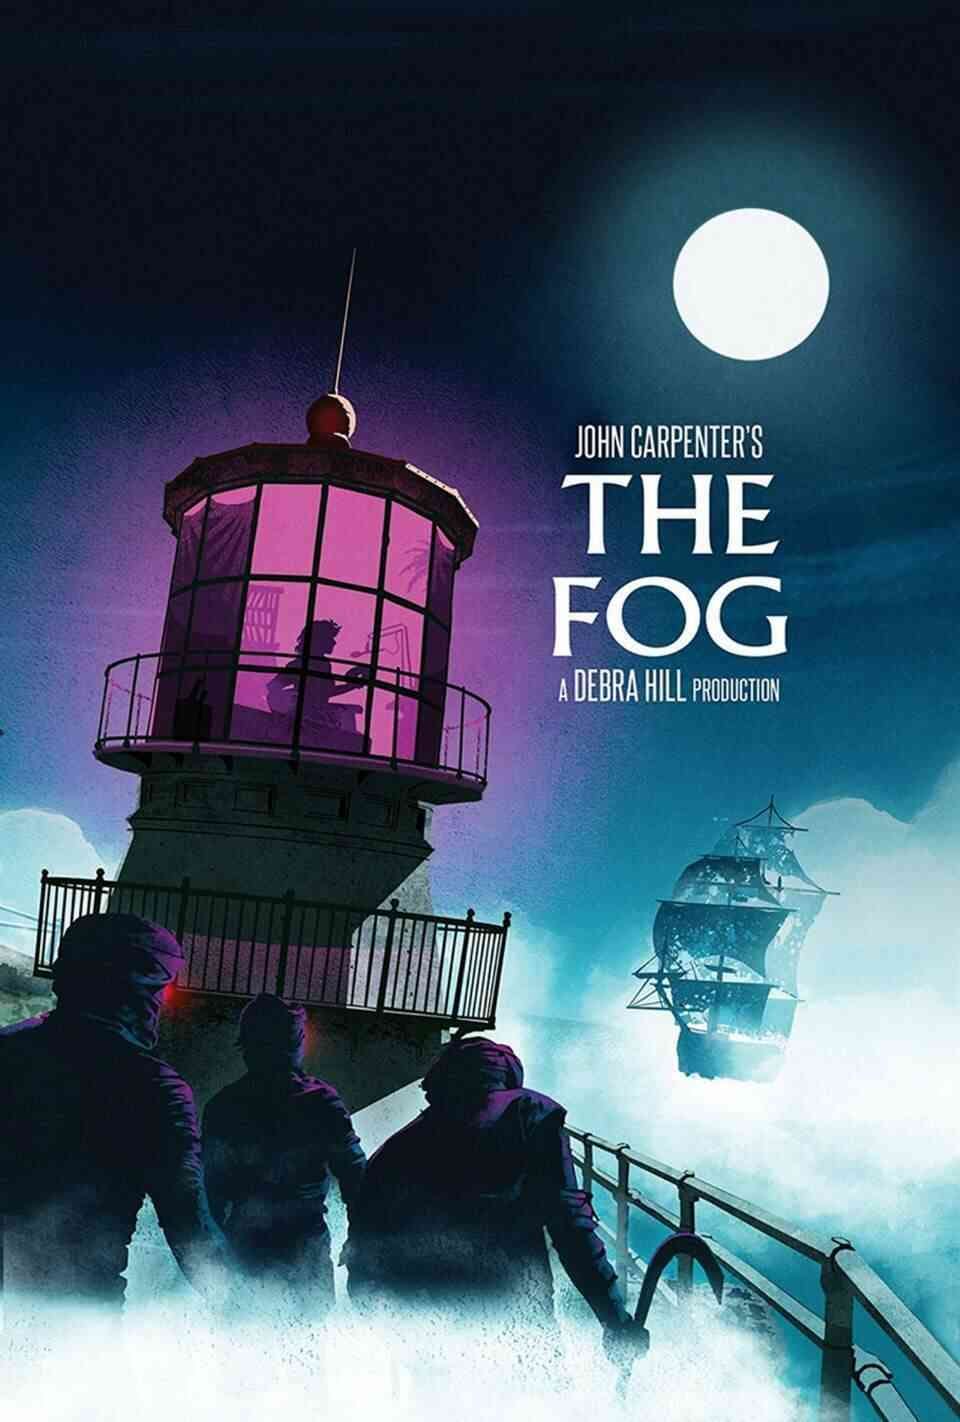 Read The Fog screenplay (poster)